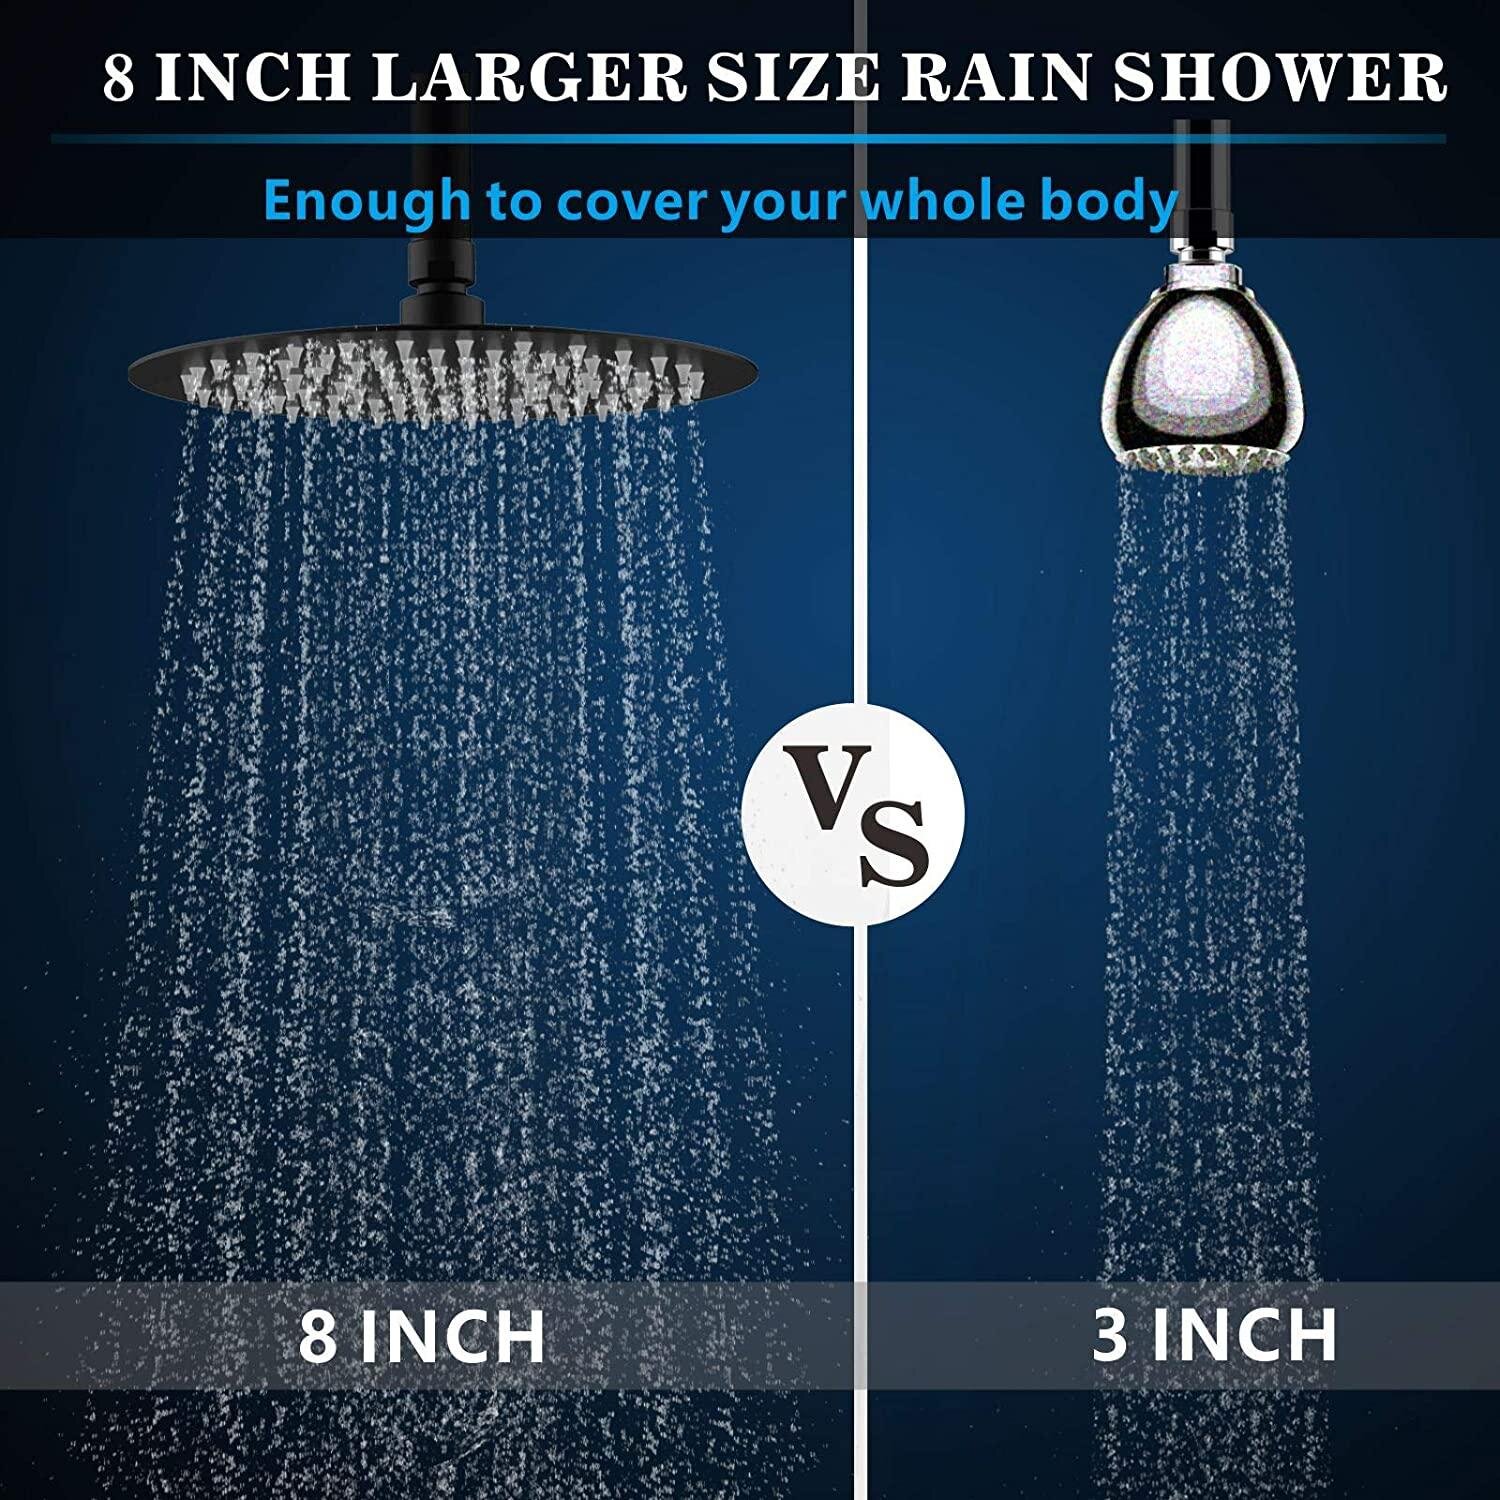 Shower head Made of 304 Stainless Steel Comfortable Shower Experience Even at 